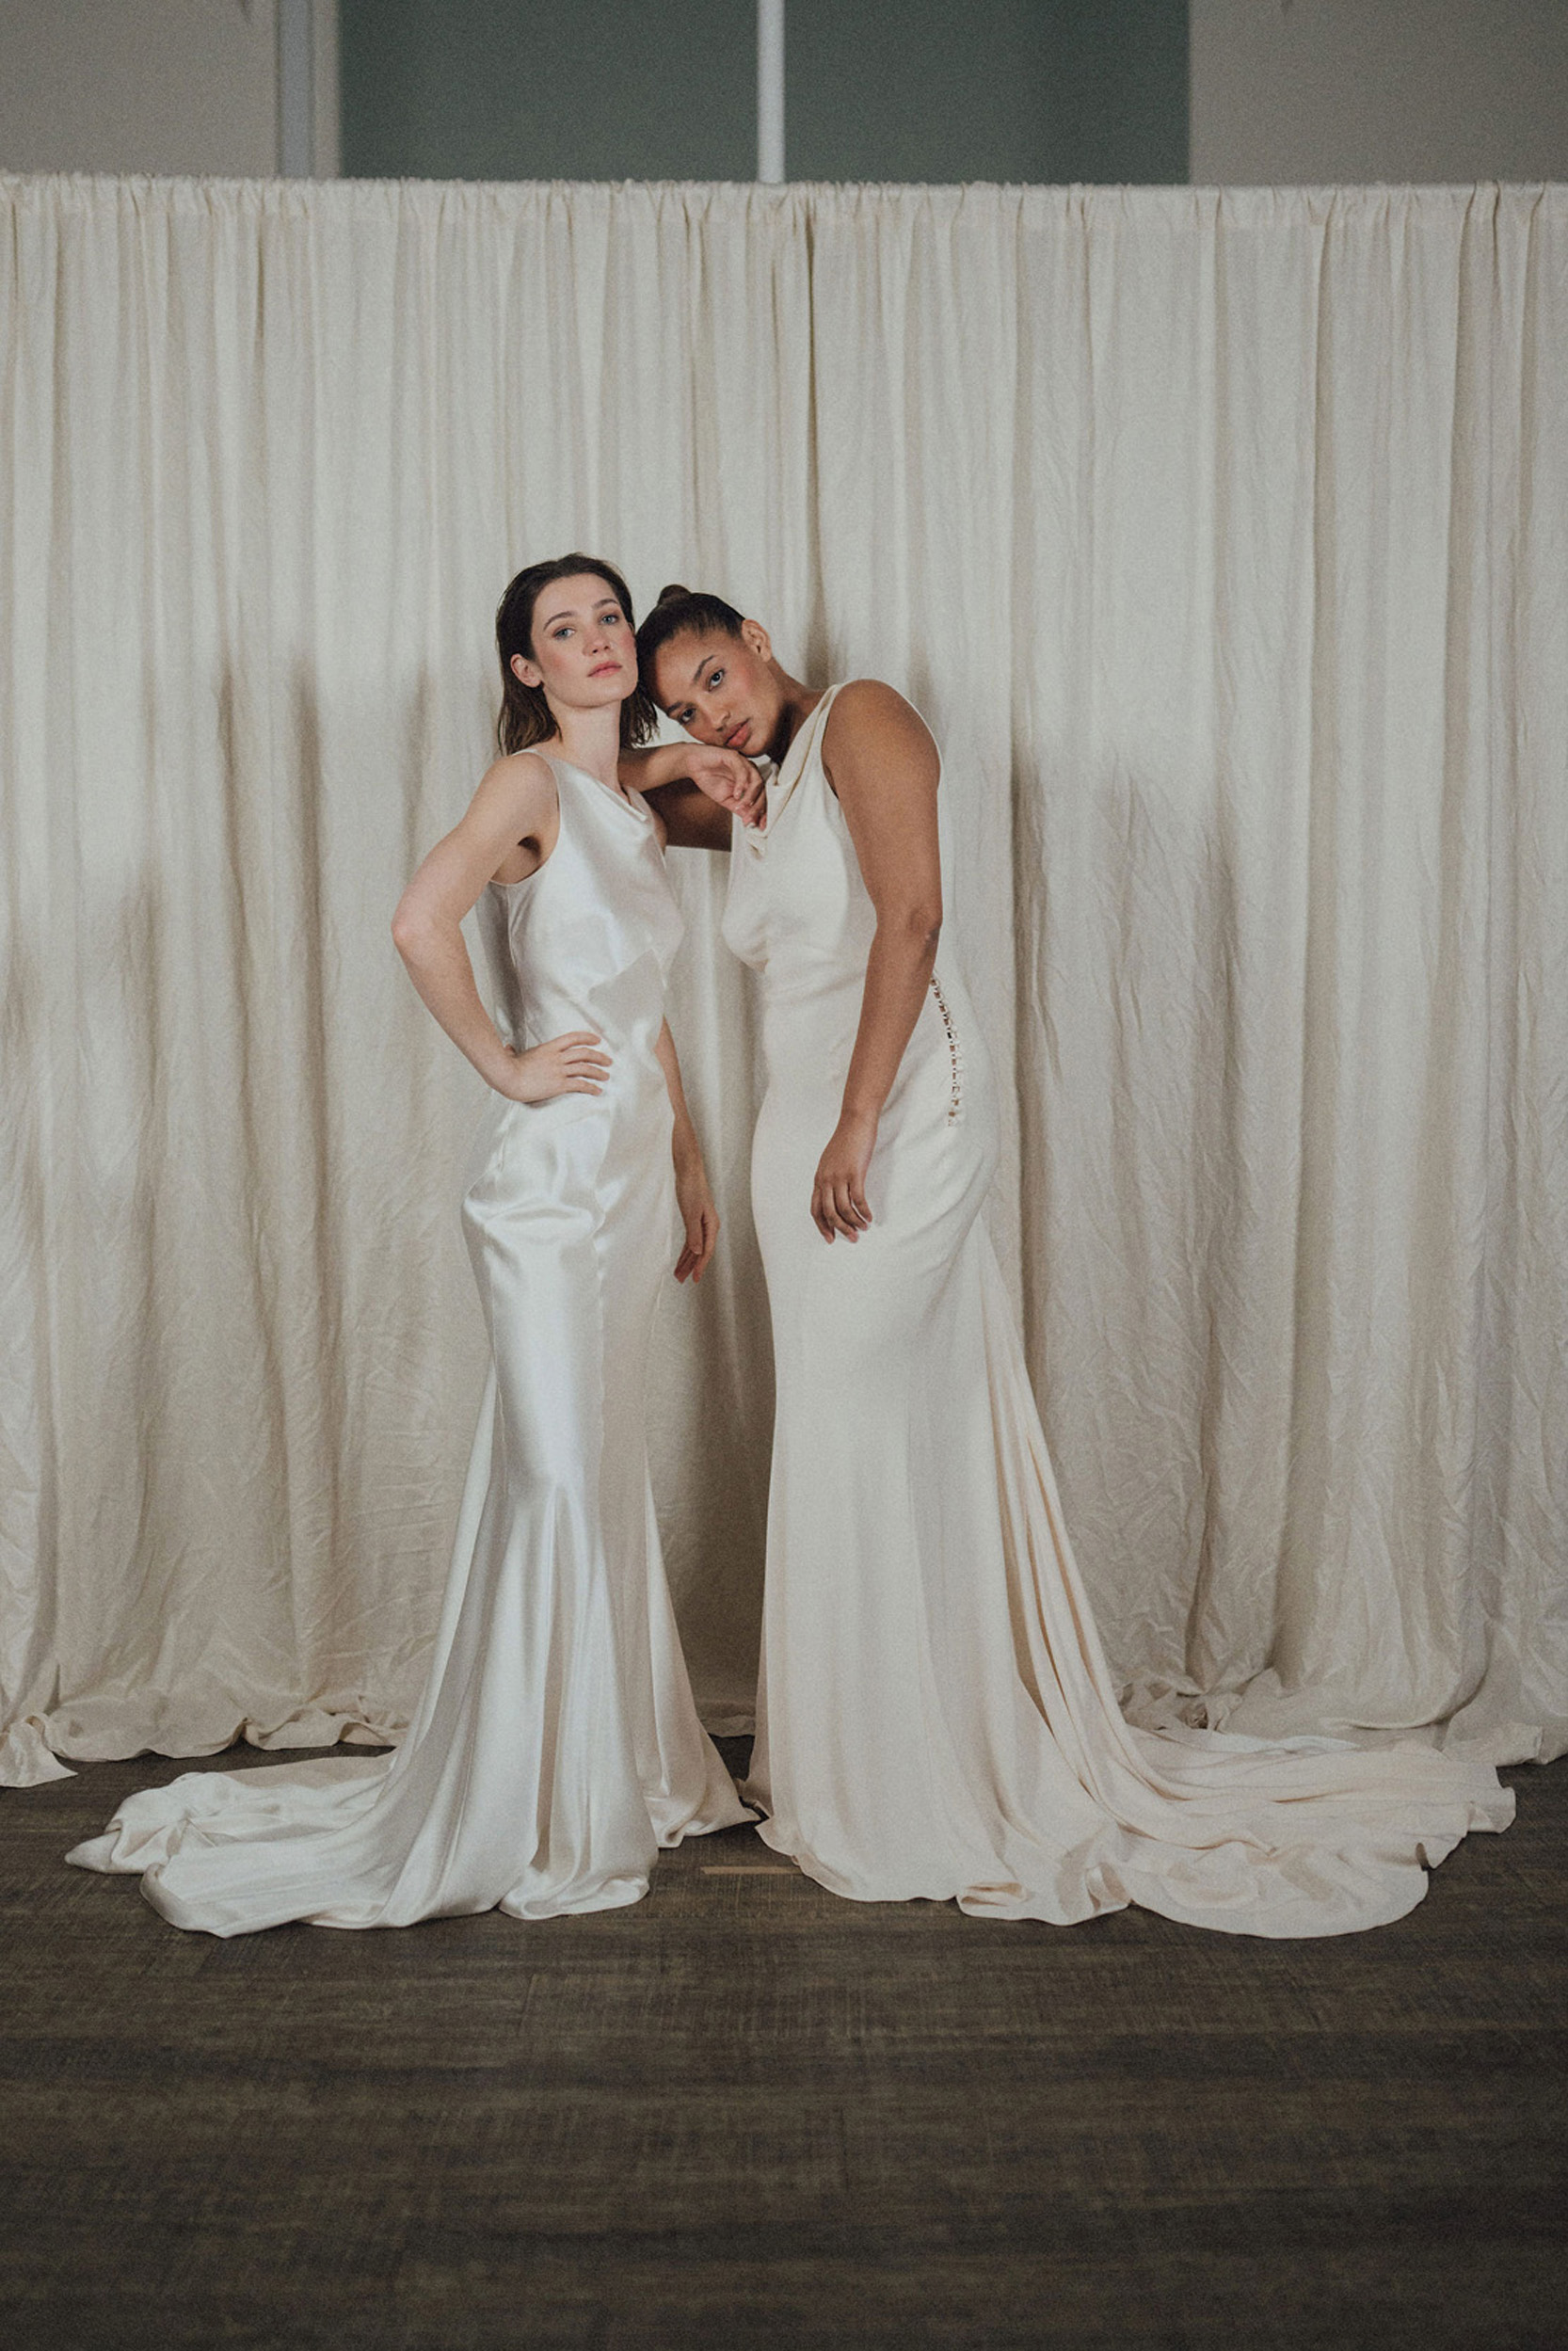 Standard and plus size modern wedding dress designs by Rolling in Roses. Sustainable bridal fashion.